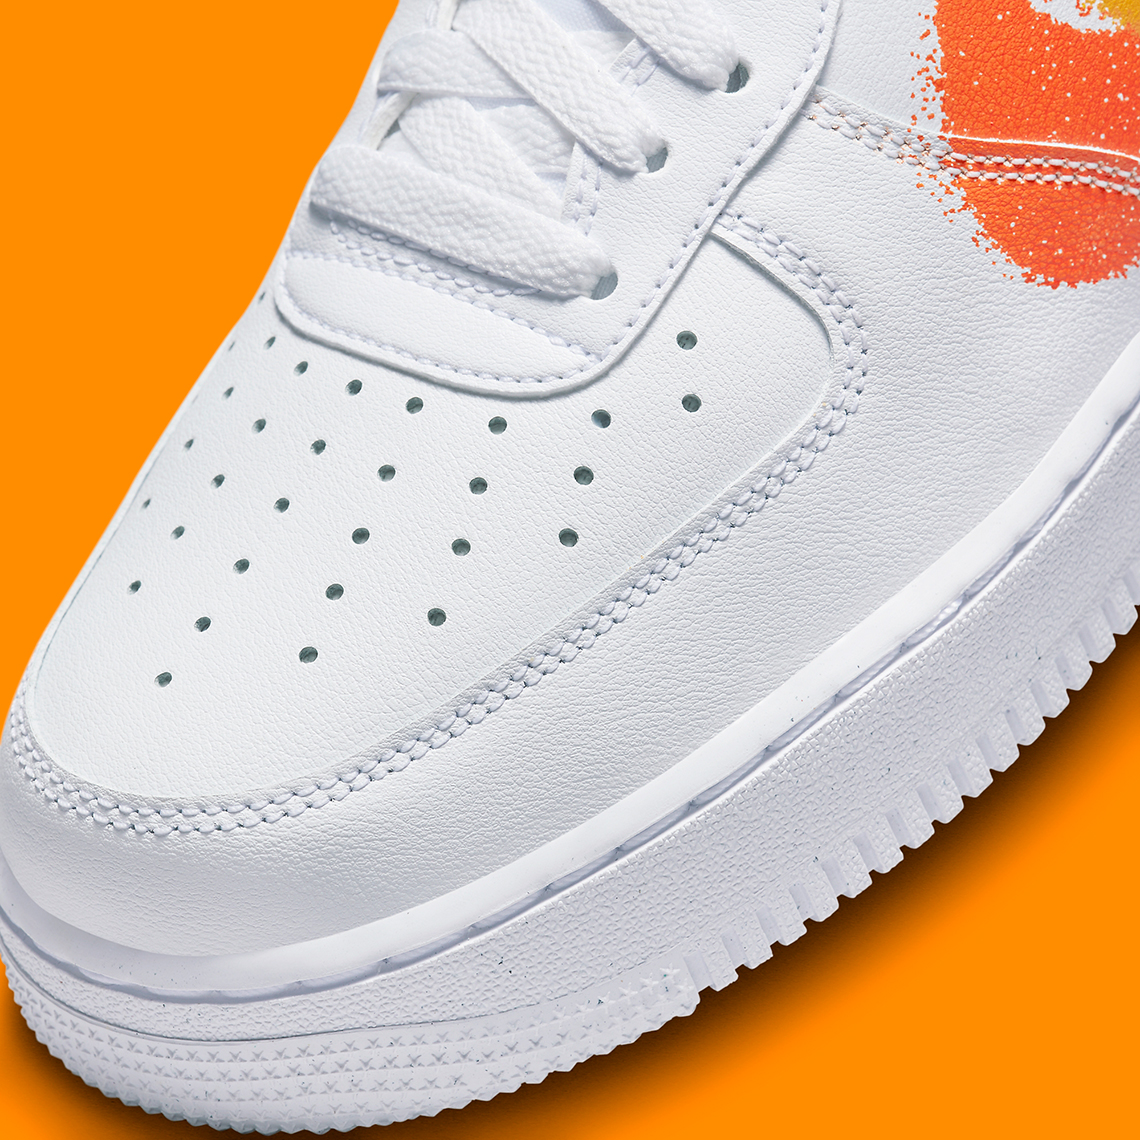 Nike Air Force 1 '07 double swoosh spray trainers in white and orange